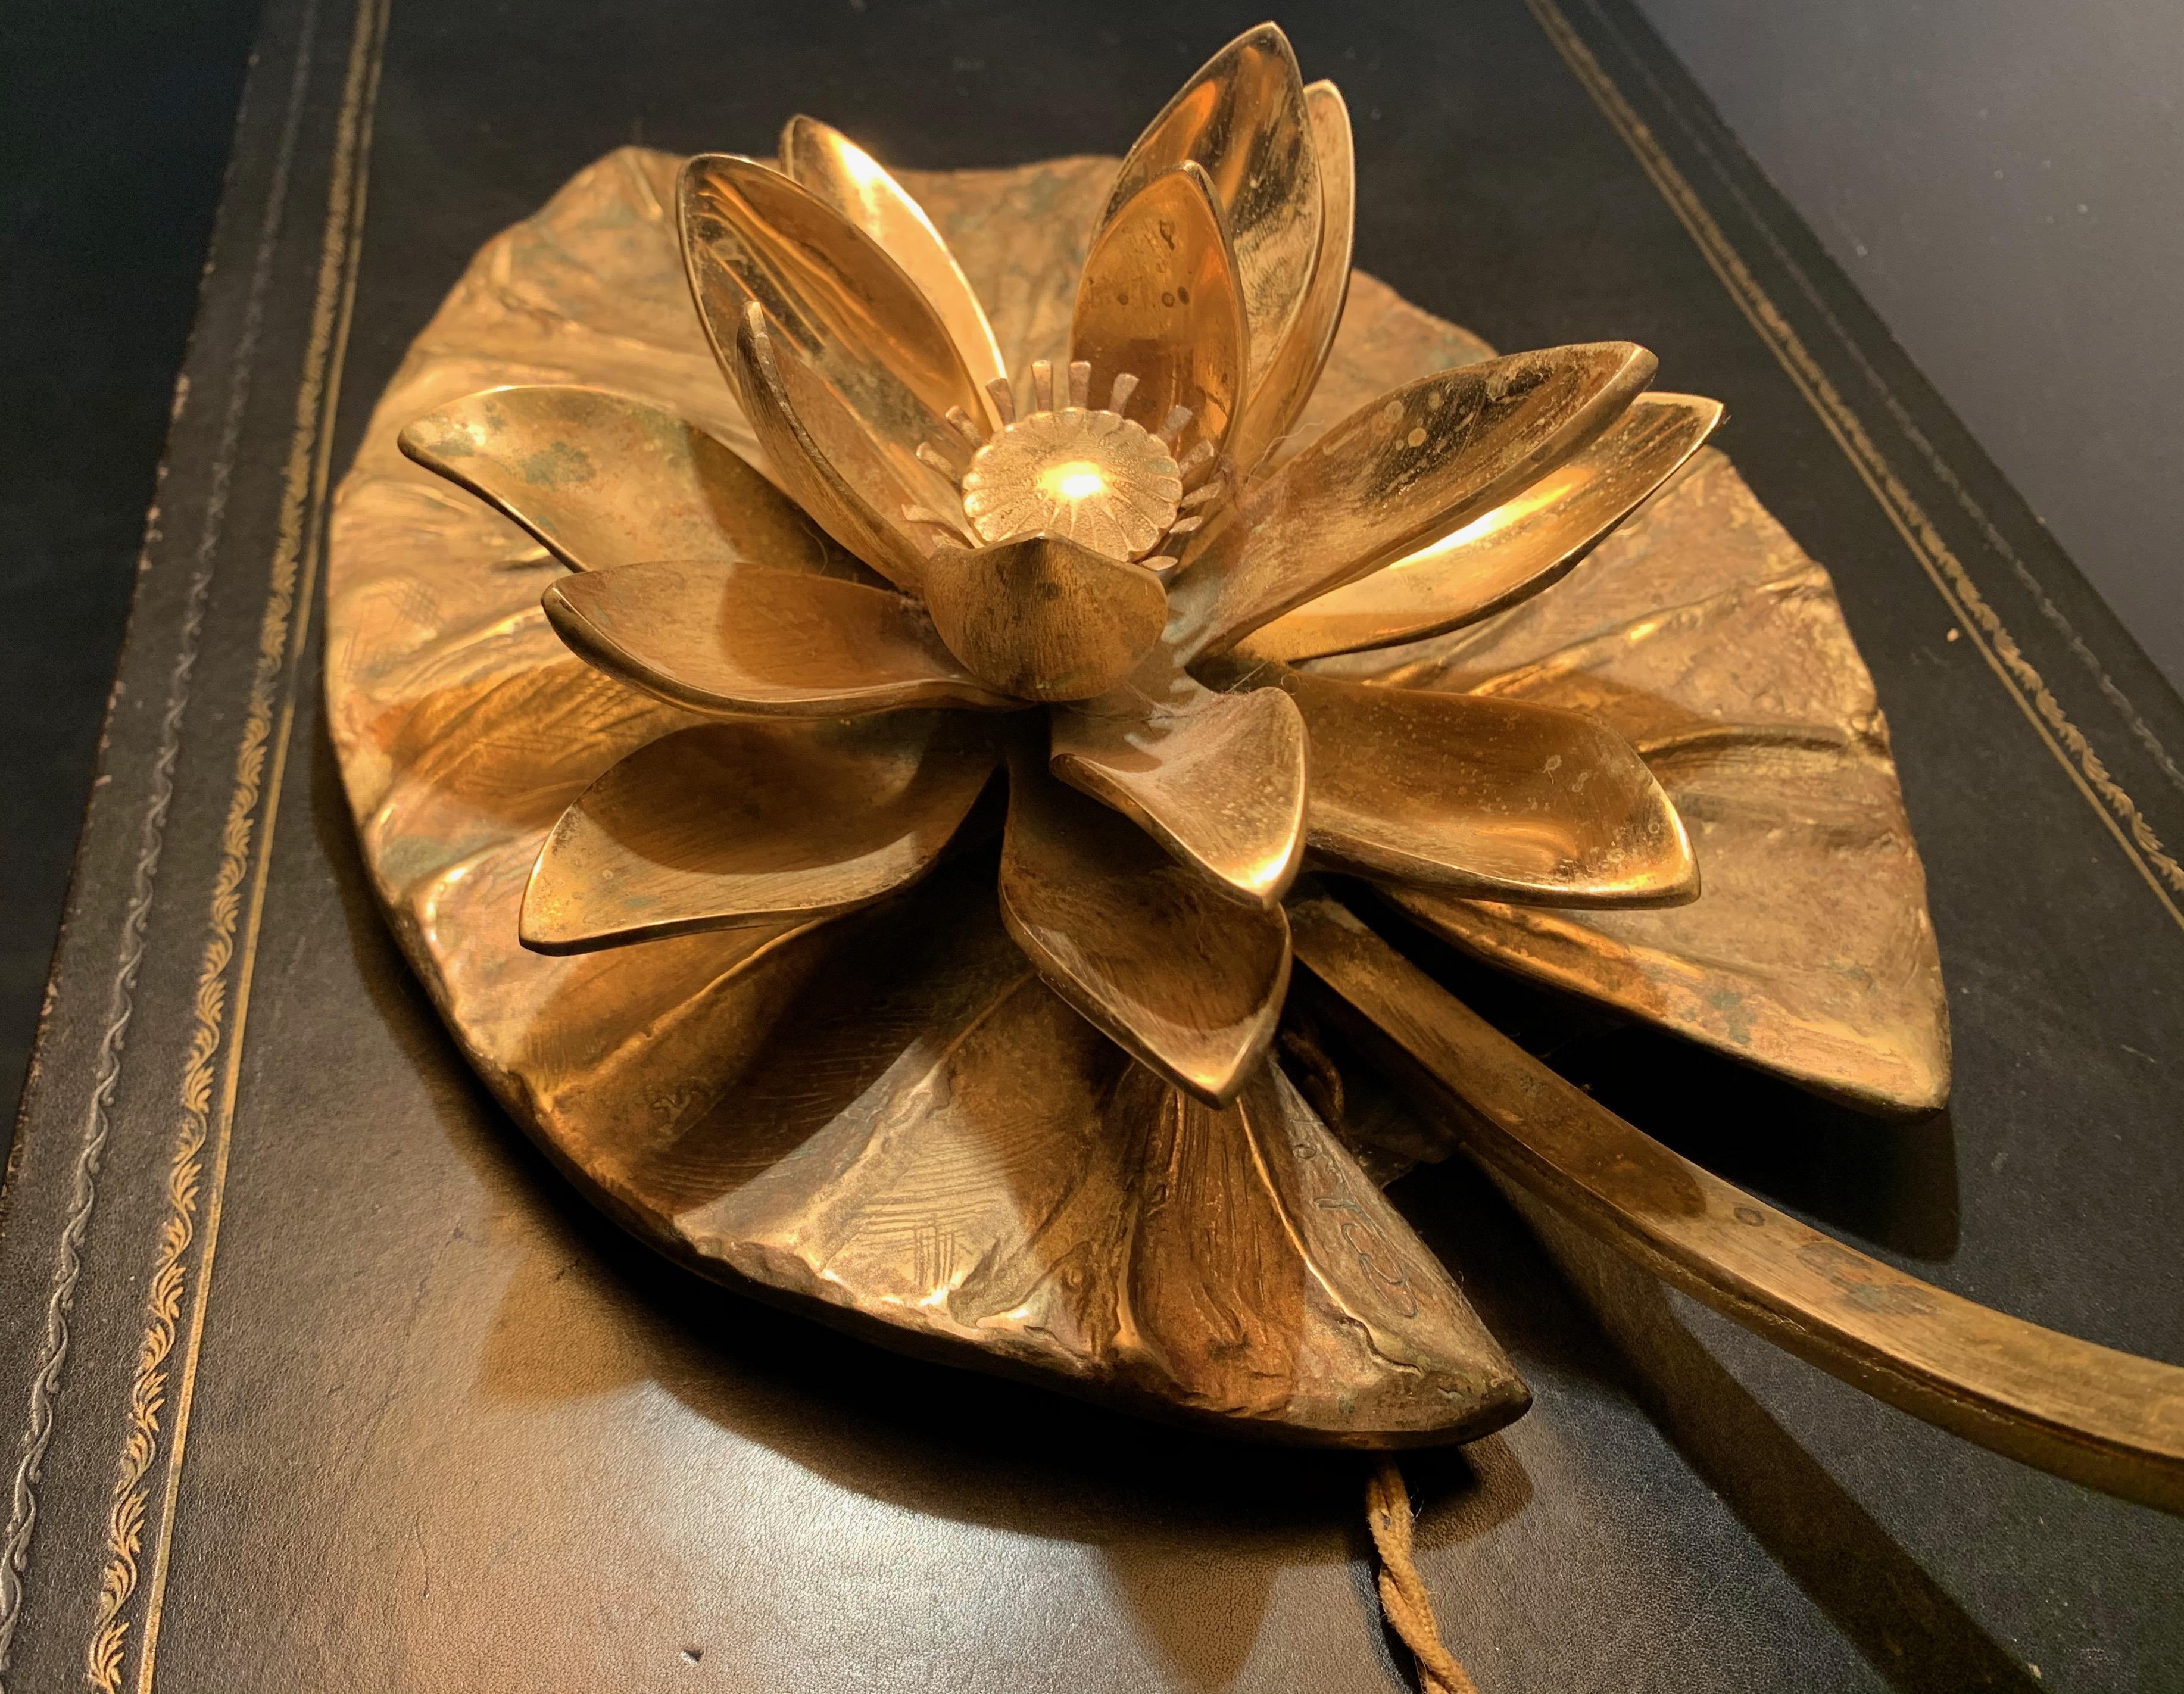 French Amazing Water Lily / Nenuphar Table Lamp with Crazy Patina For Sale